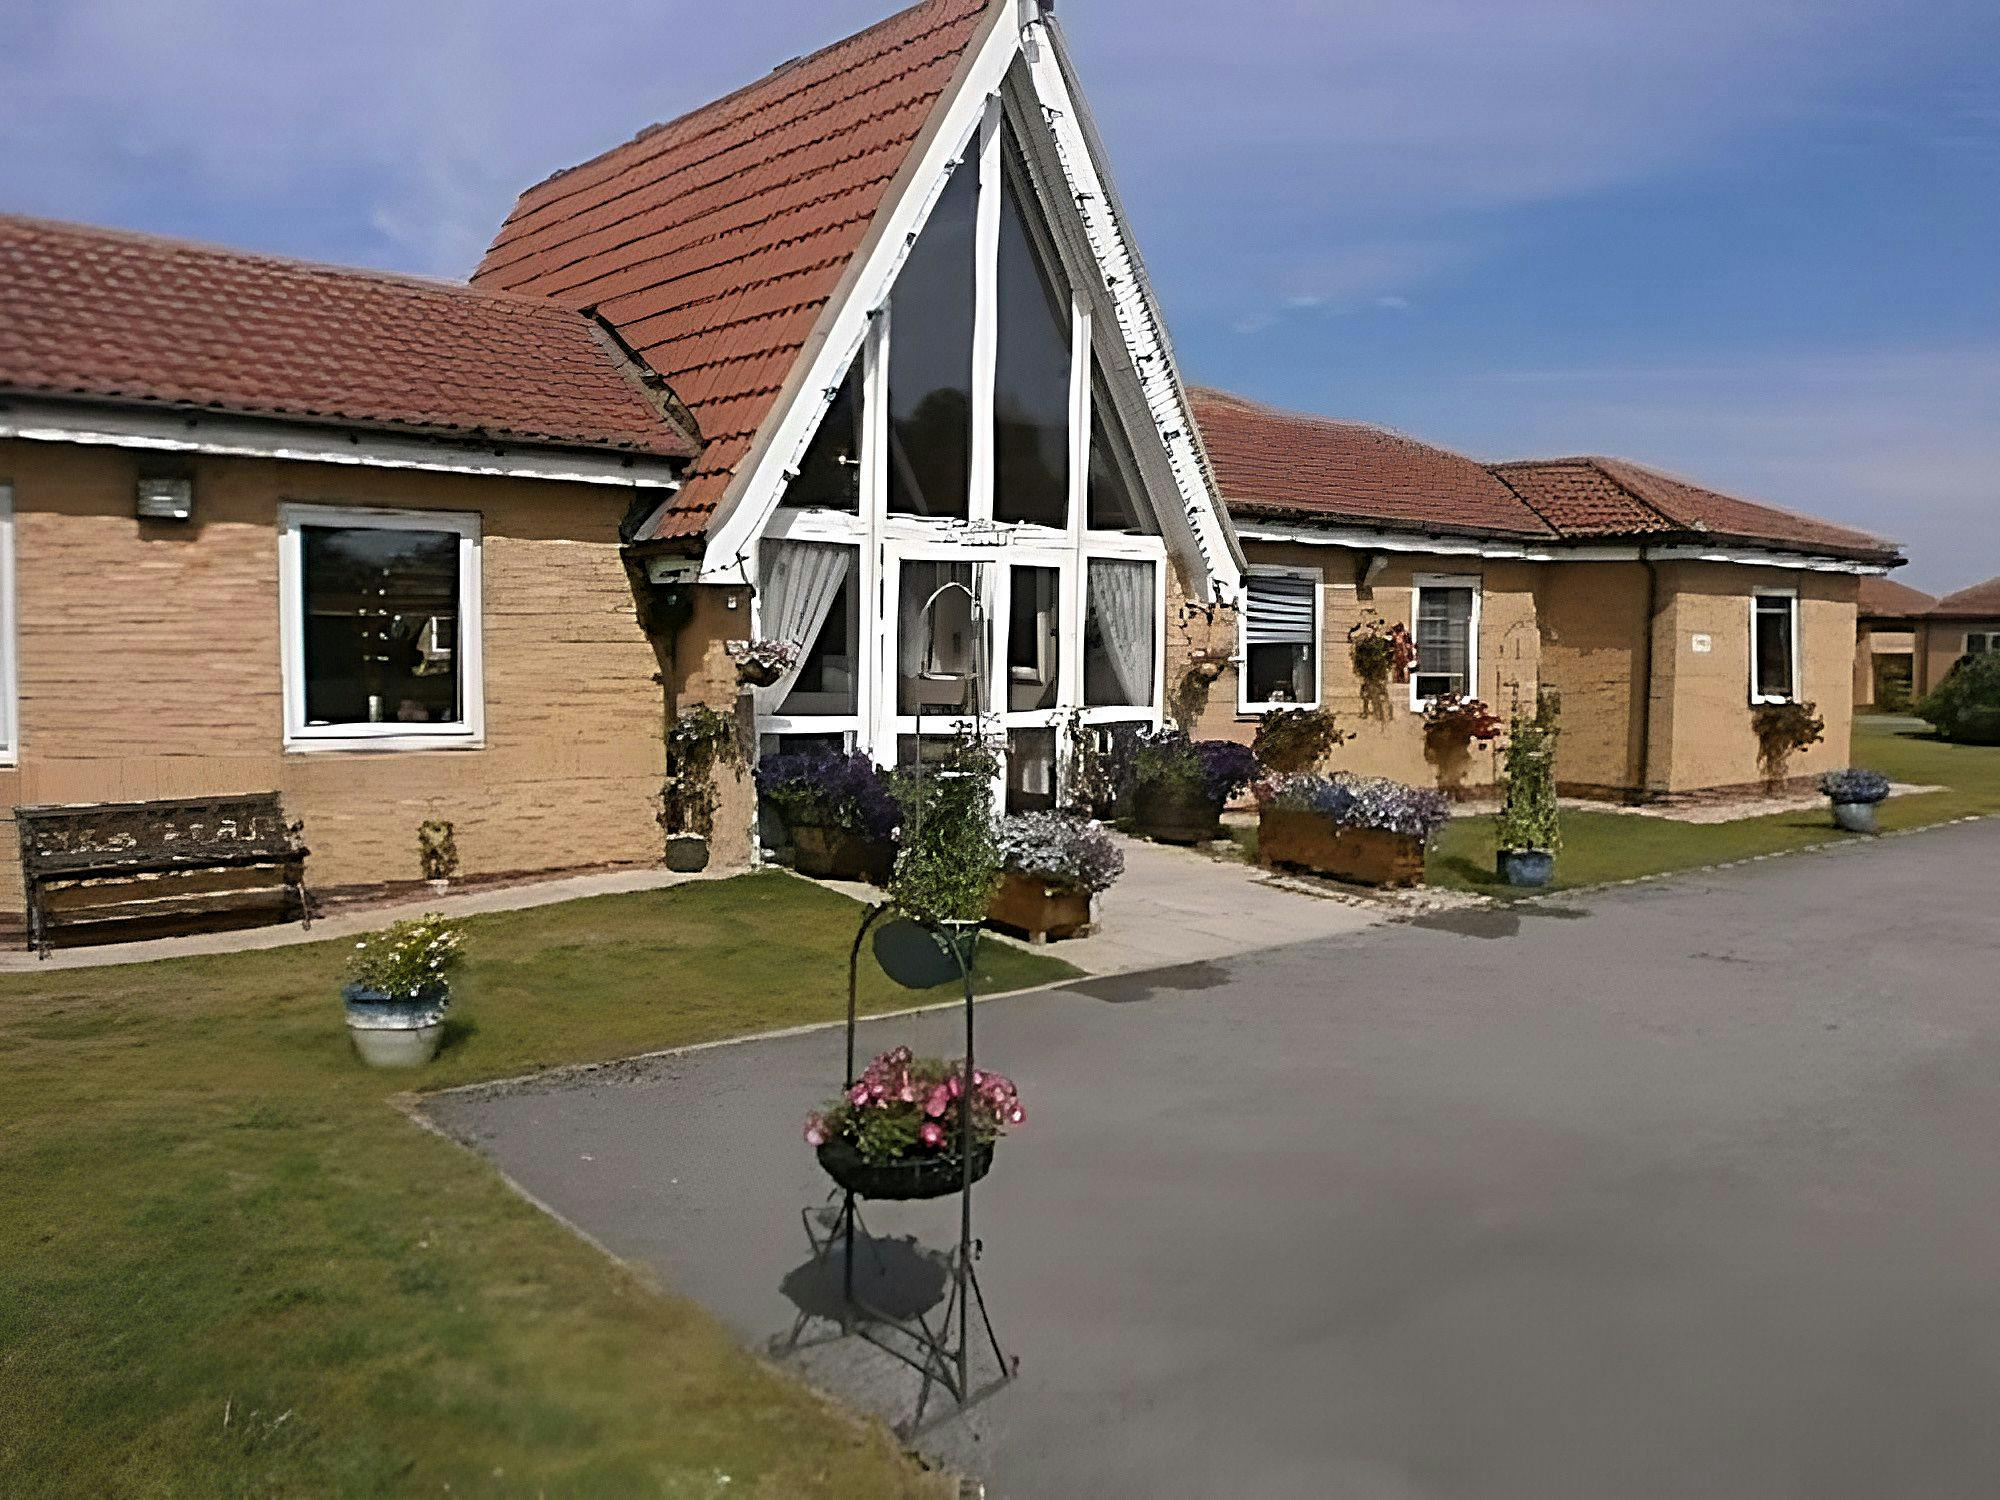 Countrywide - Field View care home 4